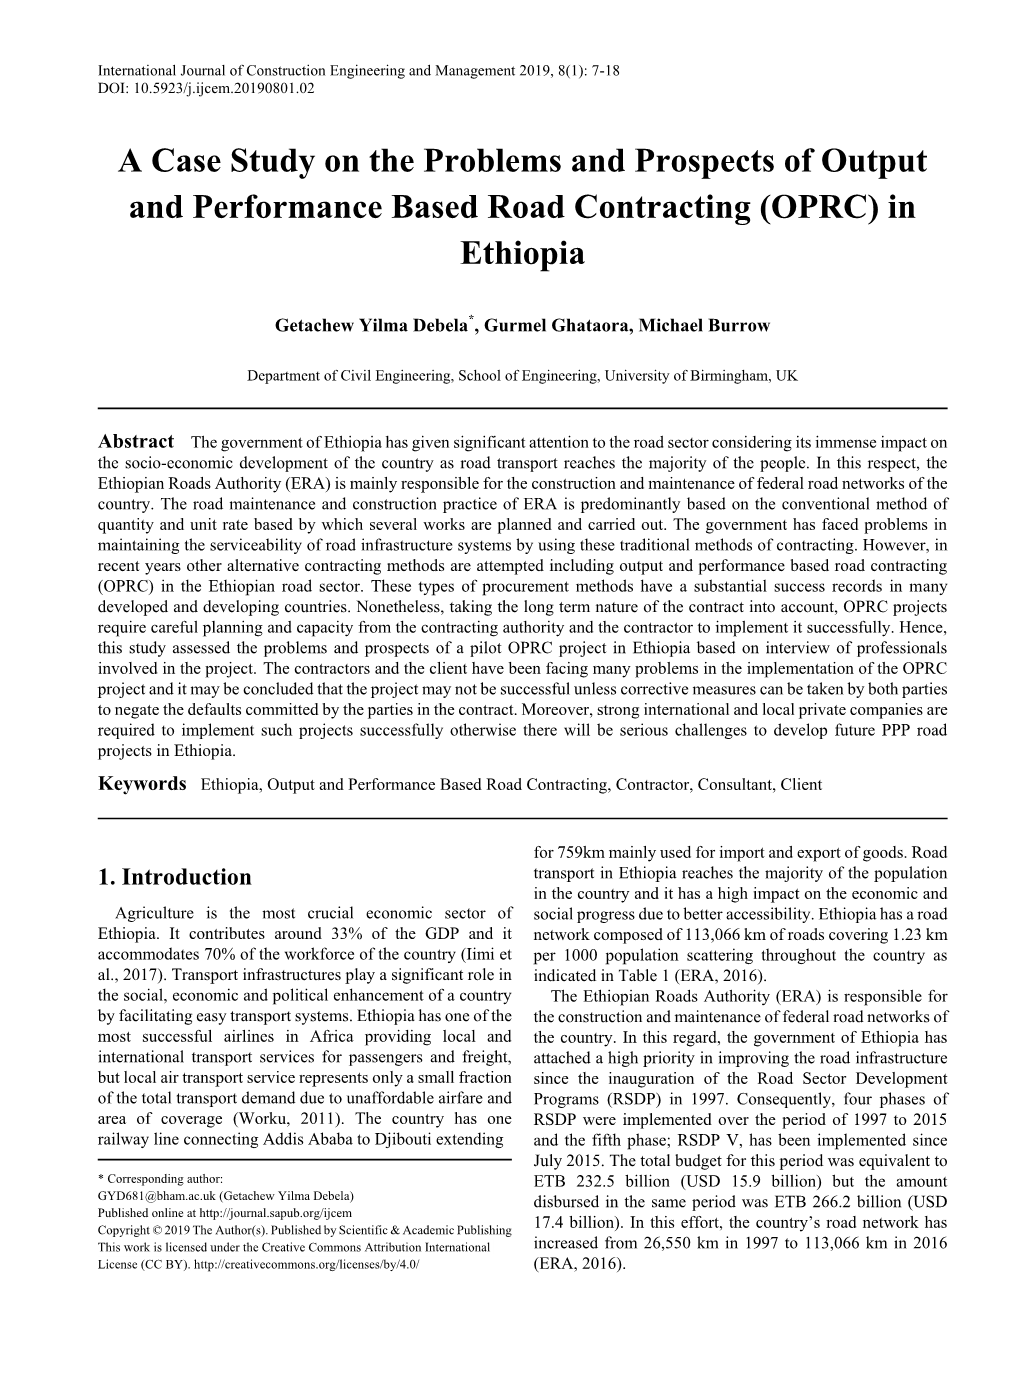 Ethiopia, Output and Performance Based Road Contracting, Contractor, Consultant, Client